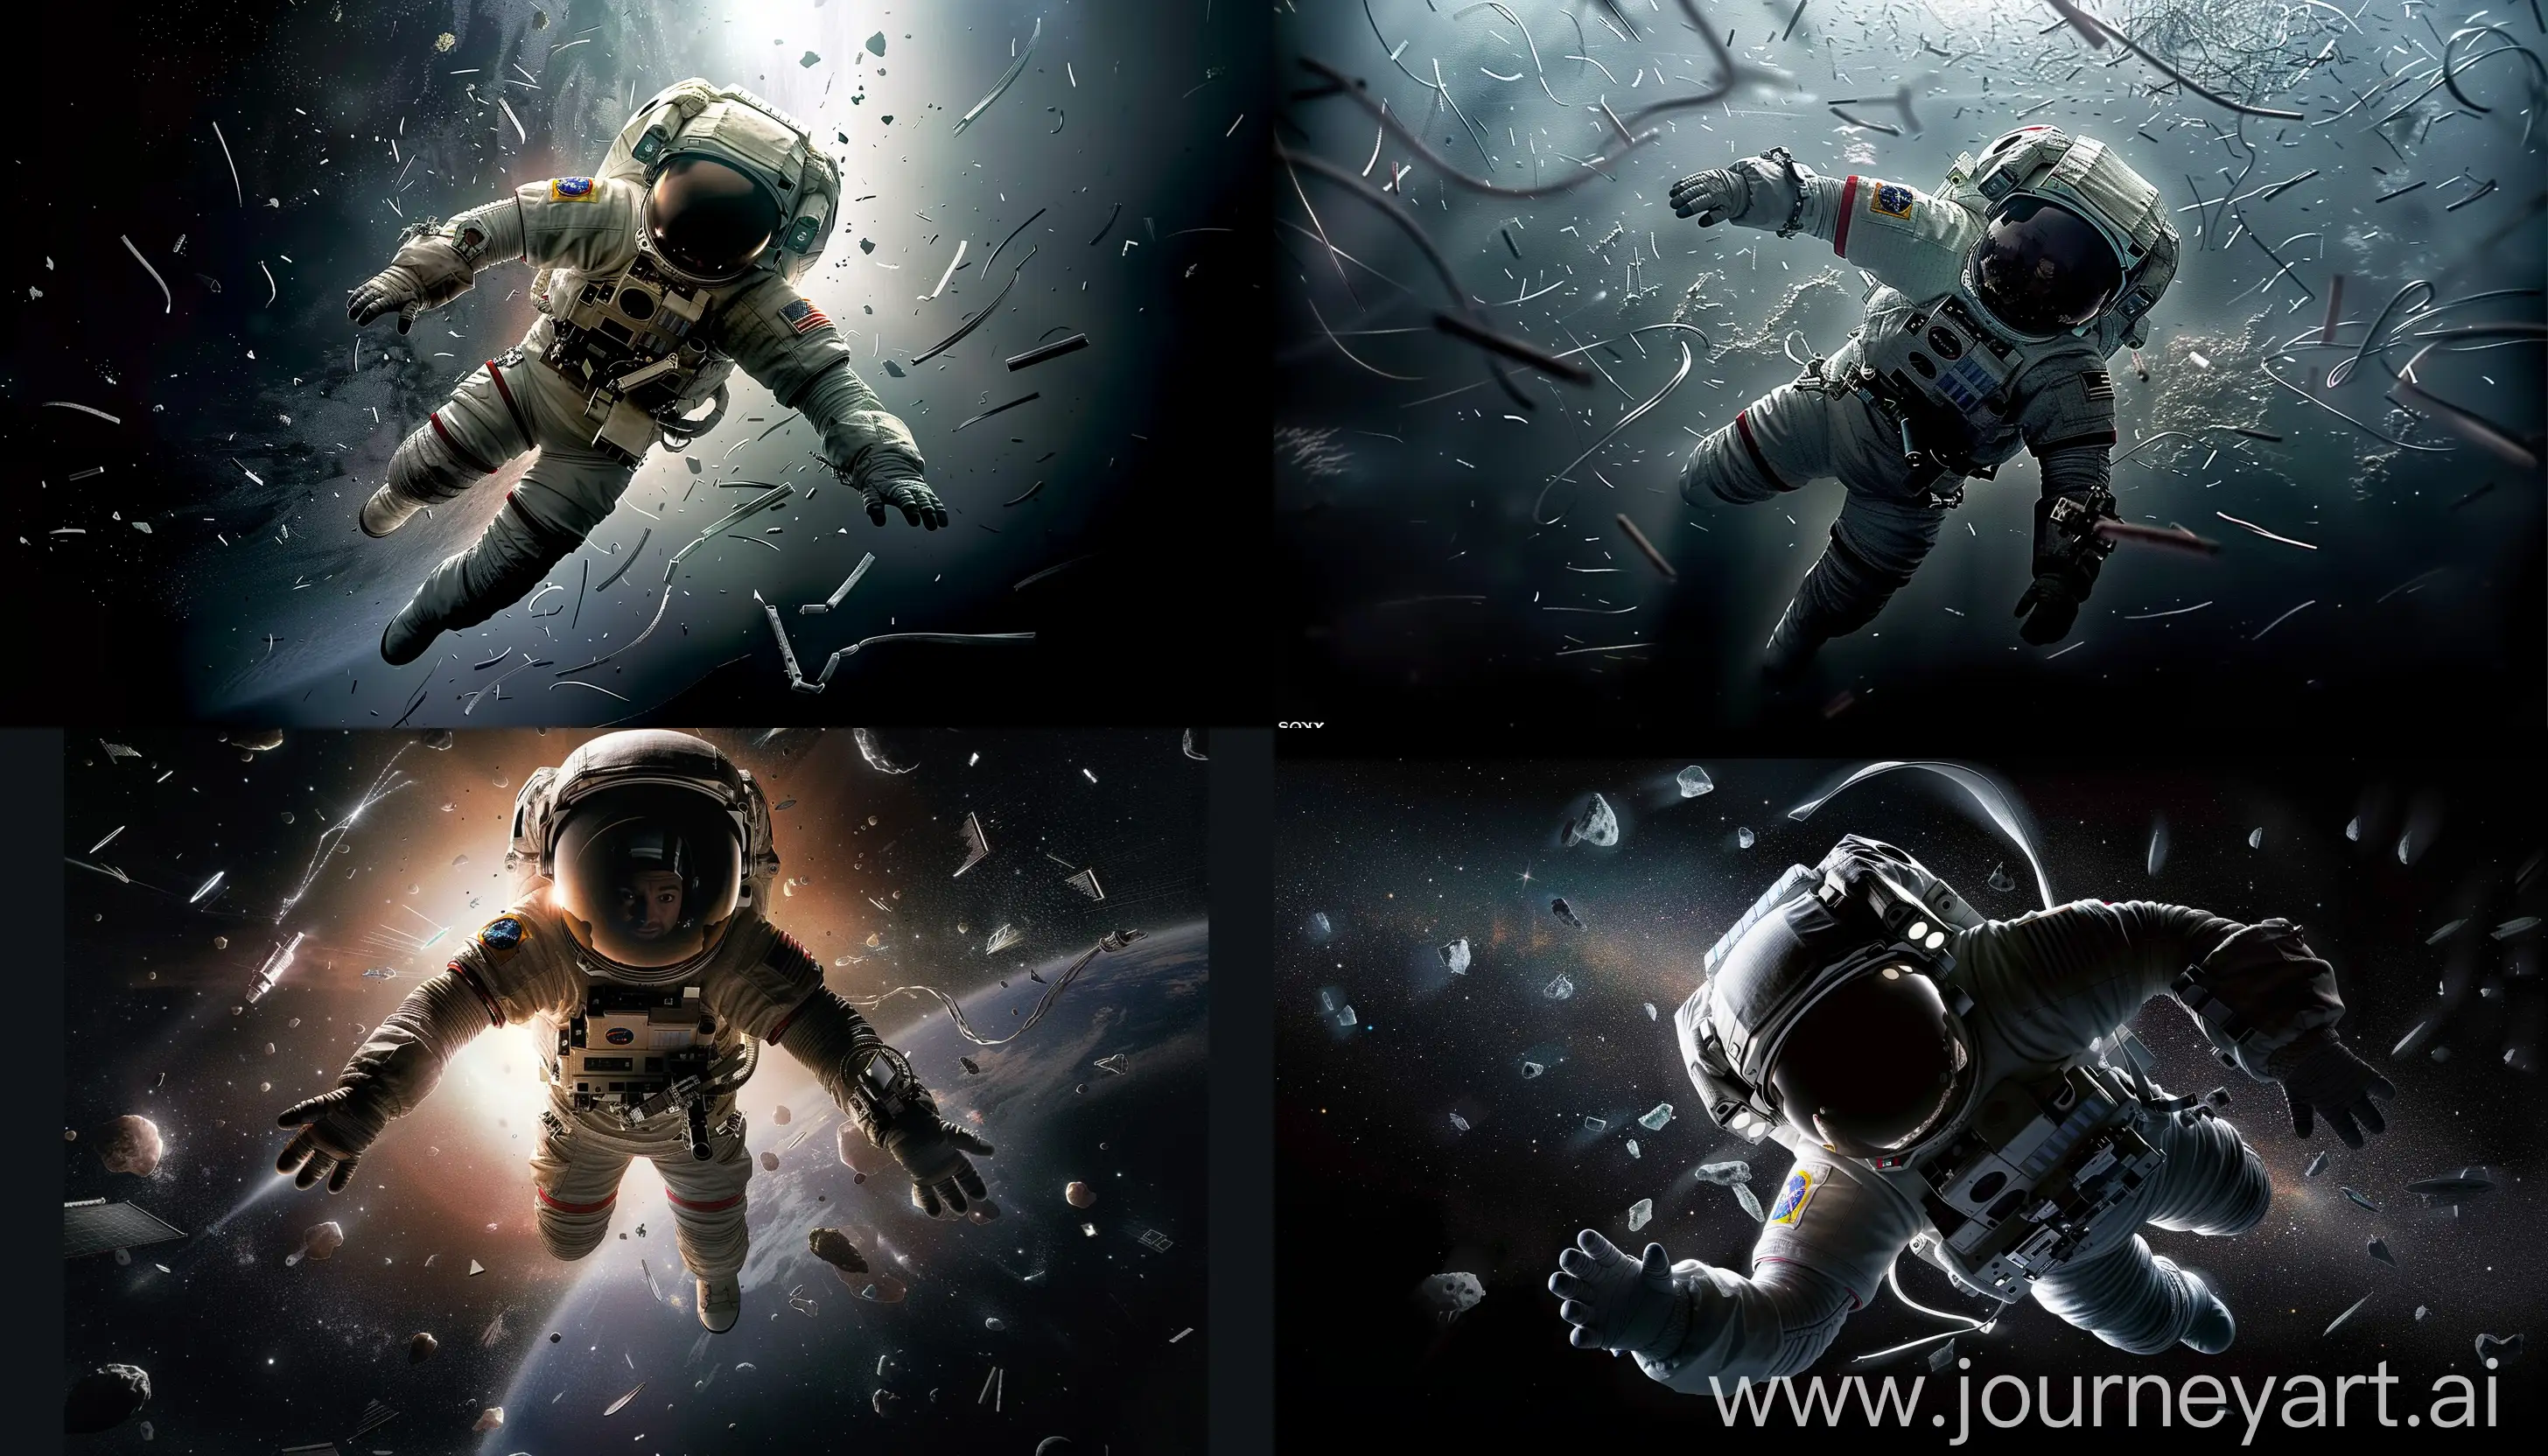 Lonely-Astronaut-Adrift-in-Space-Amidst-Debris